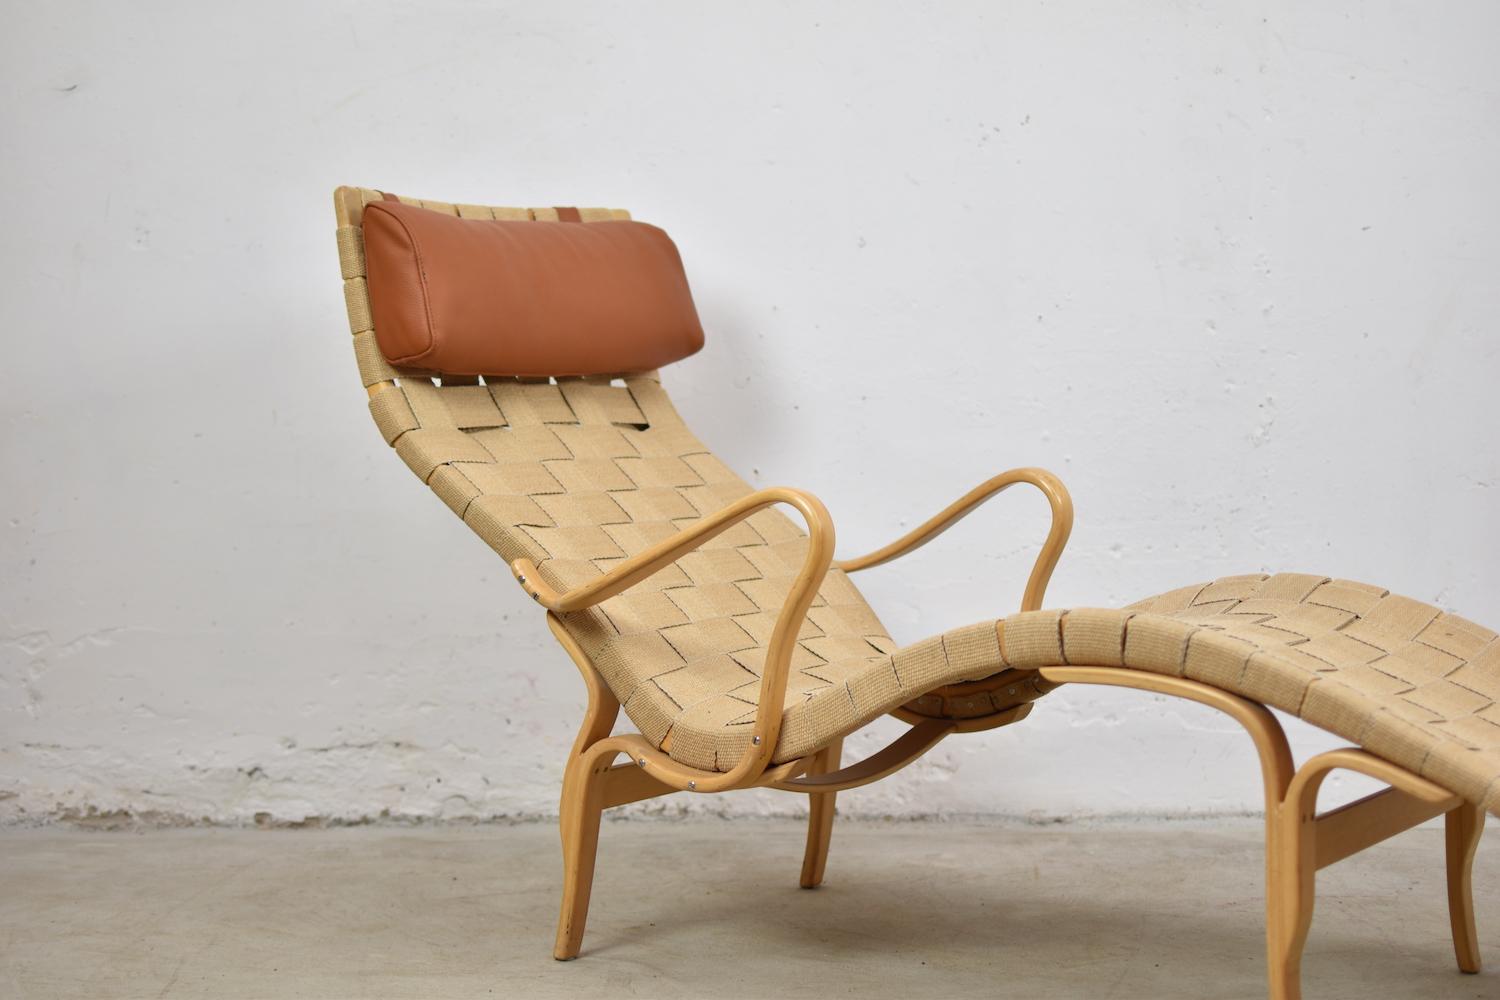 ‘Pernilla’ chaise Lounge by Bruno Mathsson for Karl Mathsson, Sweden, 1963. This item features the original webbing and laminated beech frame. All in very well presented original condition, the cushion is professionally reupholstered in cognac